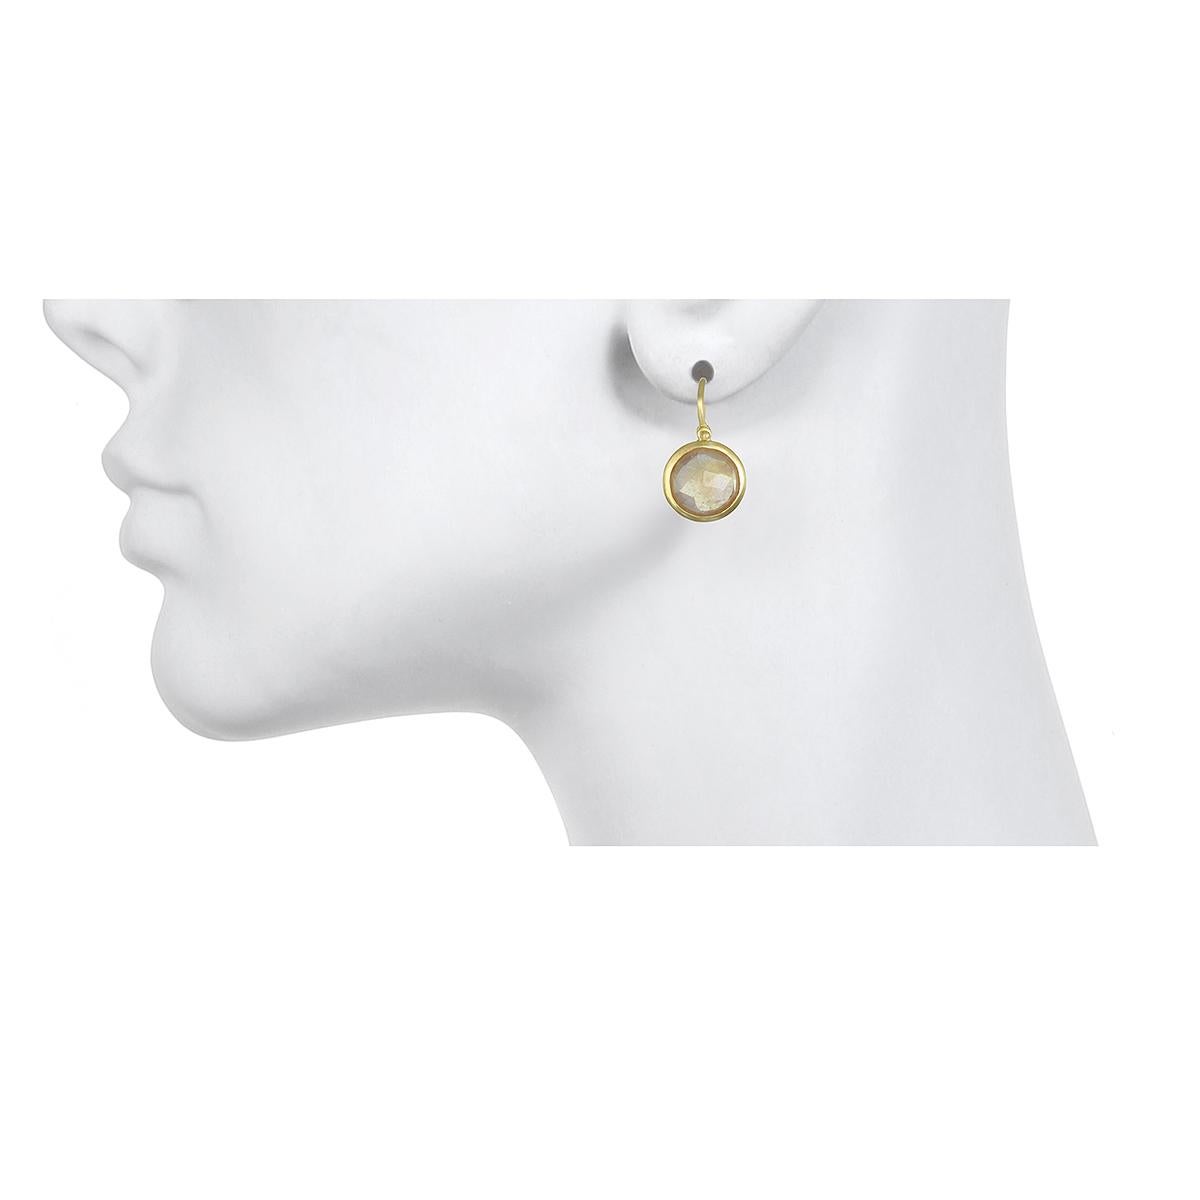 Simple, elegant, and beautiful!  Handcrafted in 18K gold*, these rose-cut sapphire round-shaped slices are bezel set and hinged for movement. The sparkle and warm inviting color make these special earrings understated and easy to wear - these will